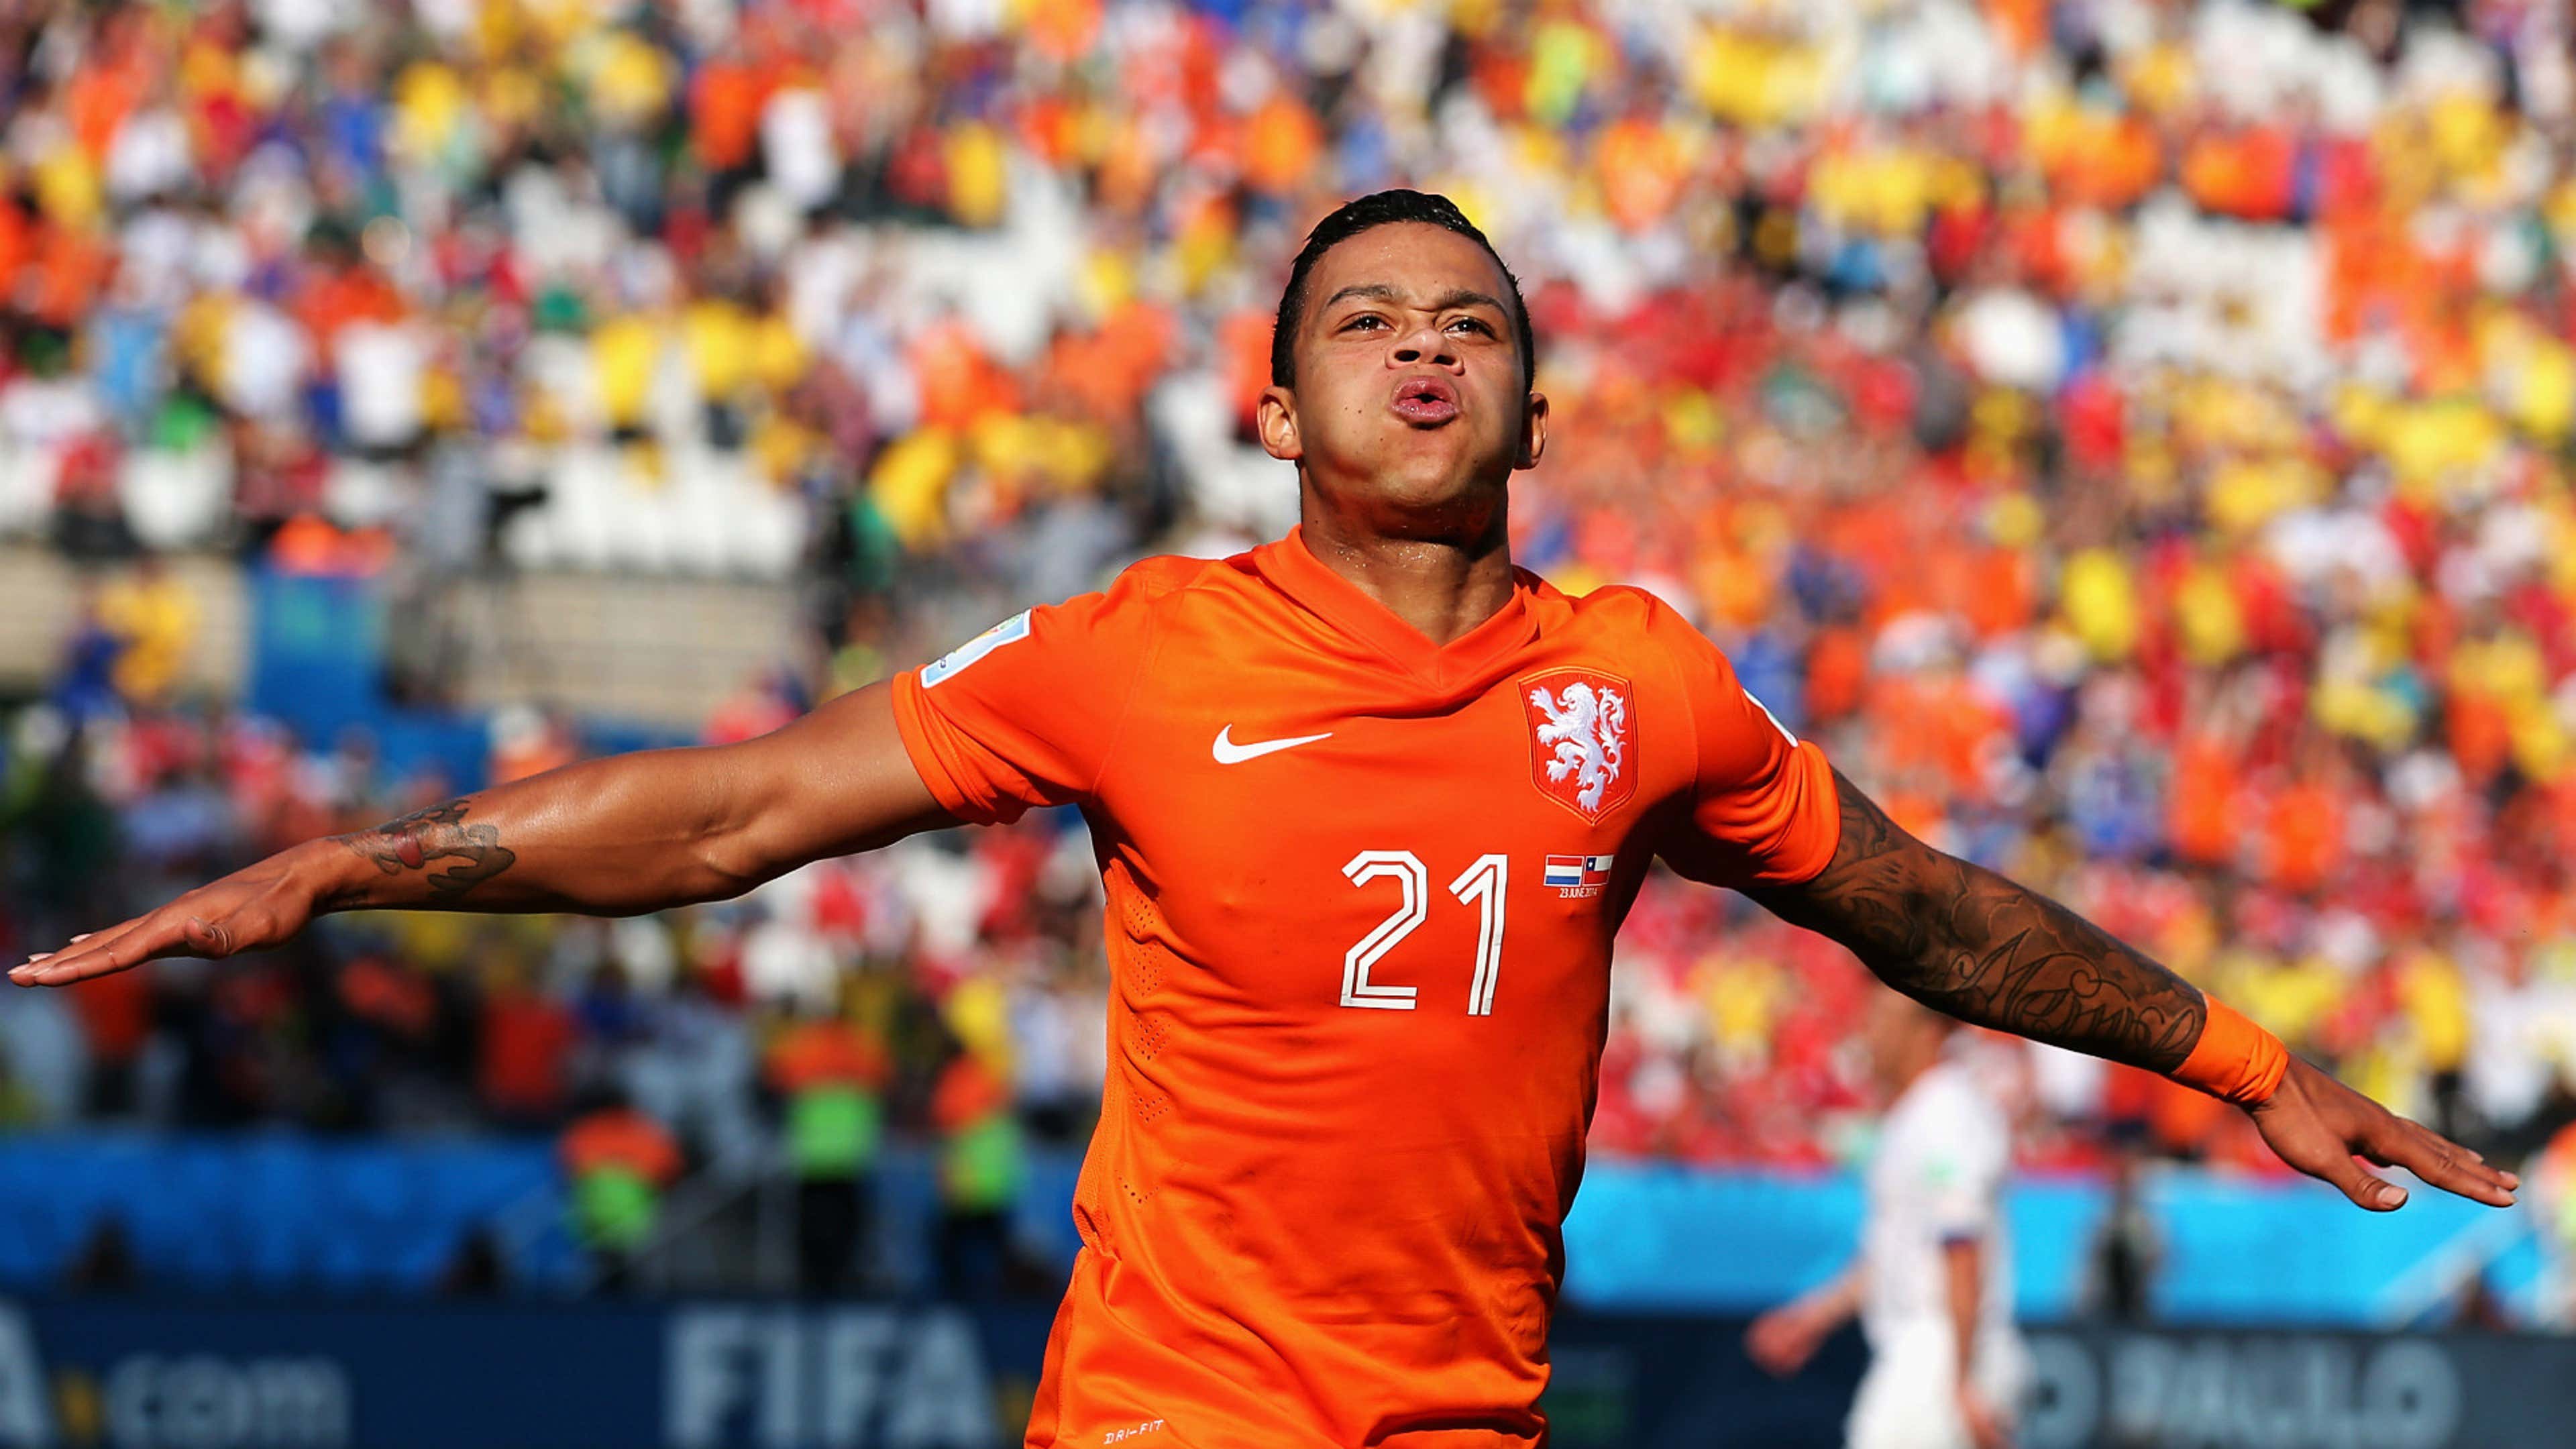 Memphis Depay is now the second highest goal scorer in the history